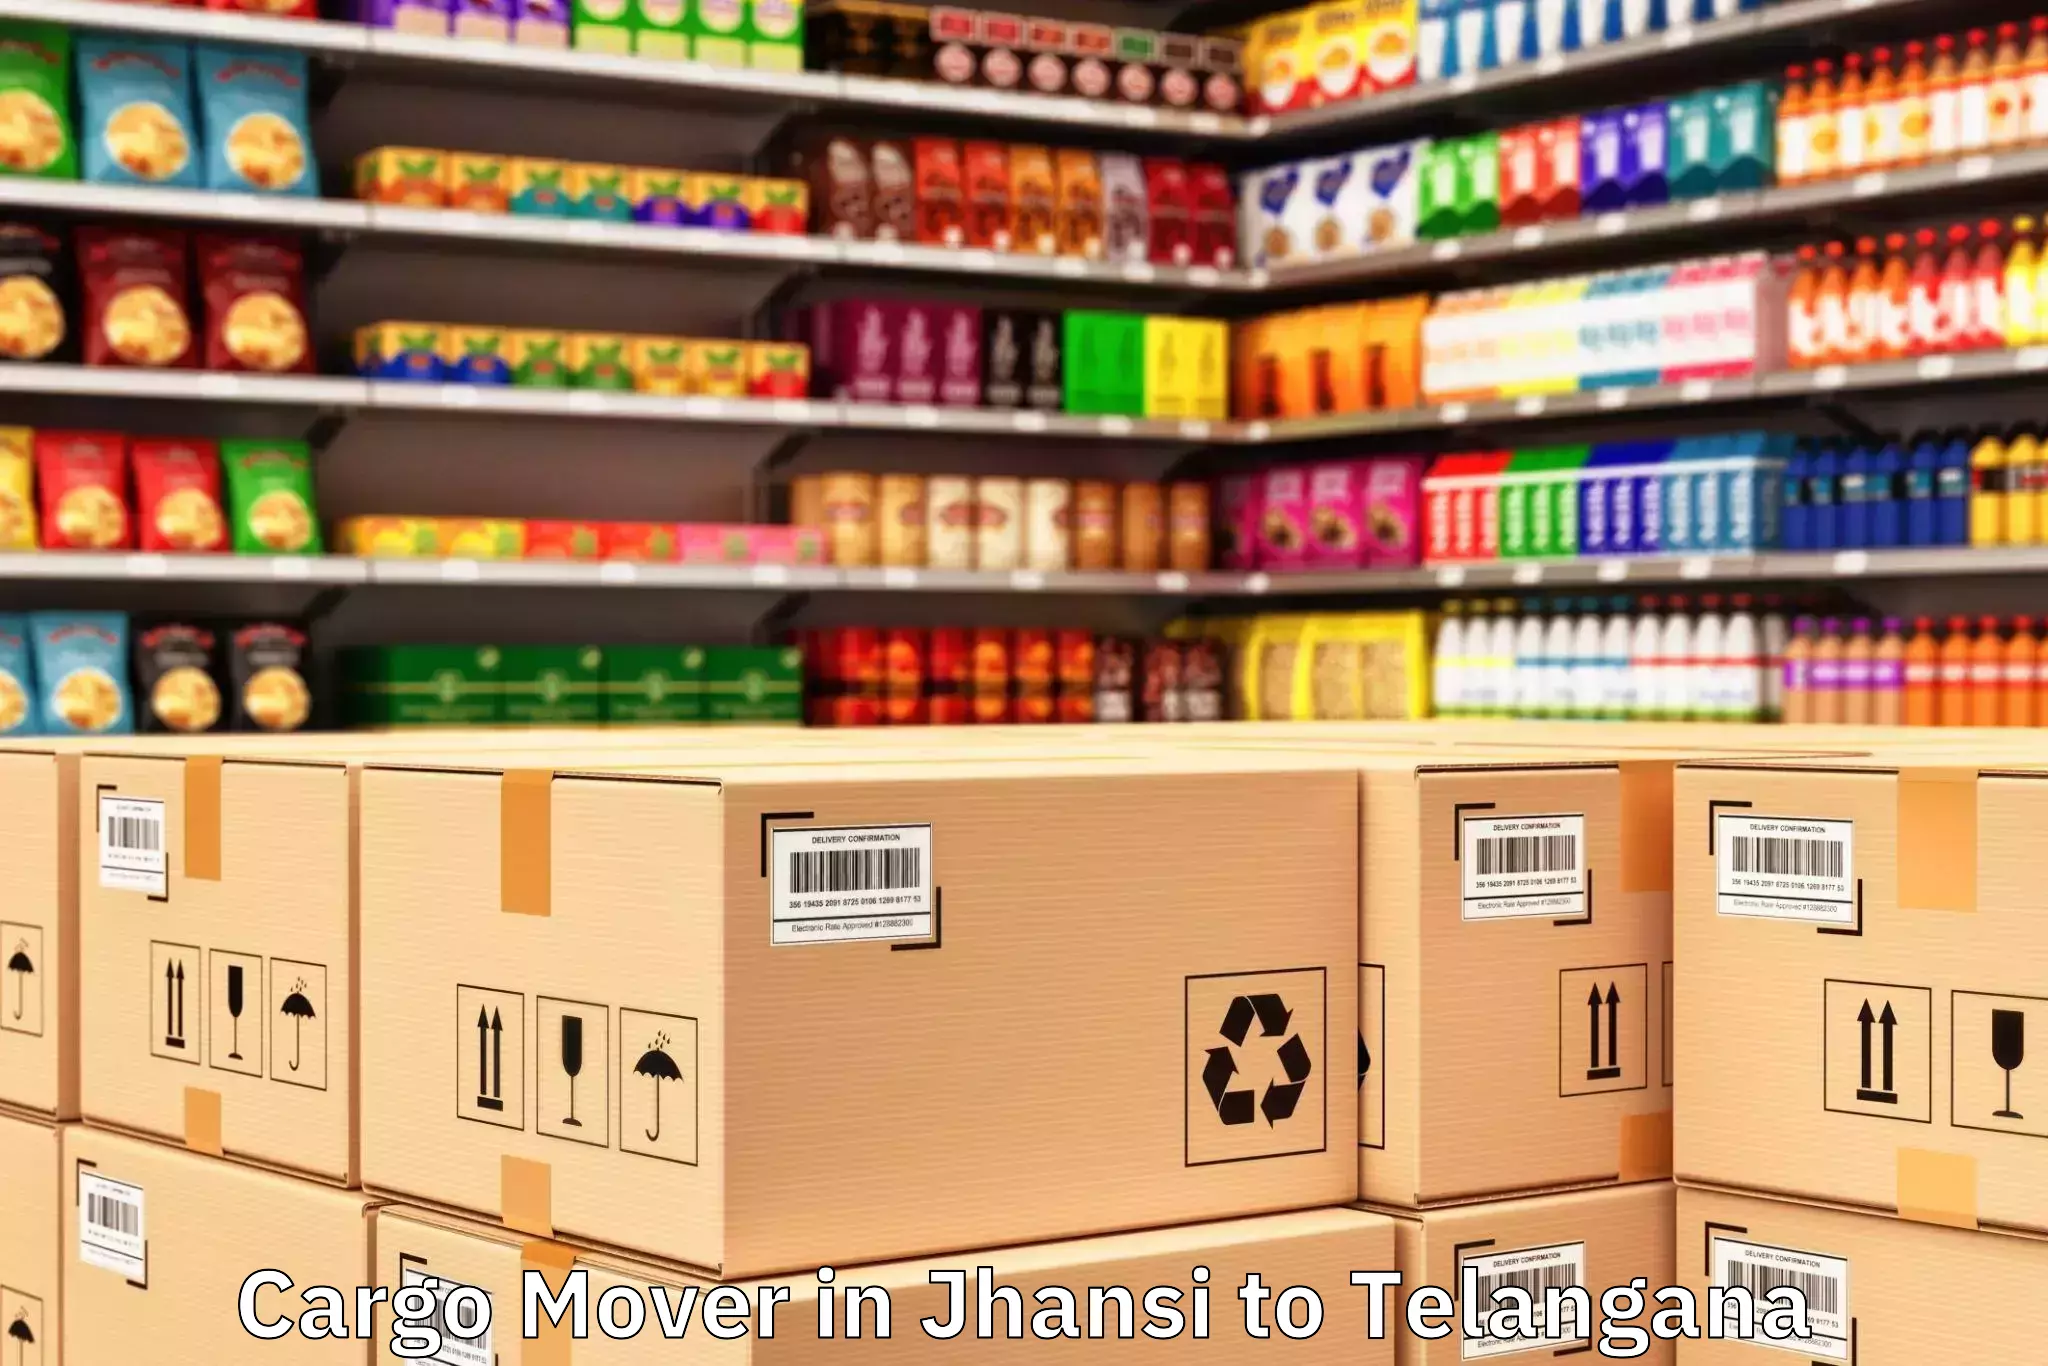 Top Jhansi to Telangana Cargo Mover Available